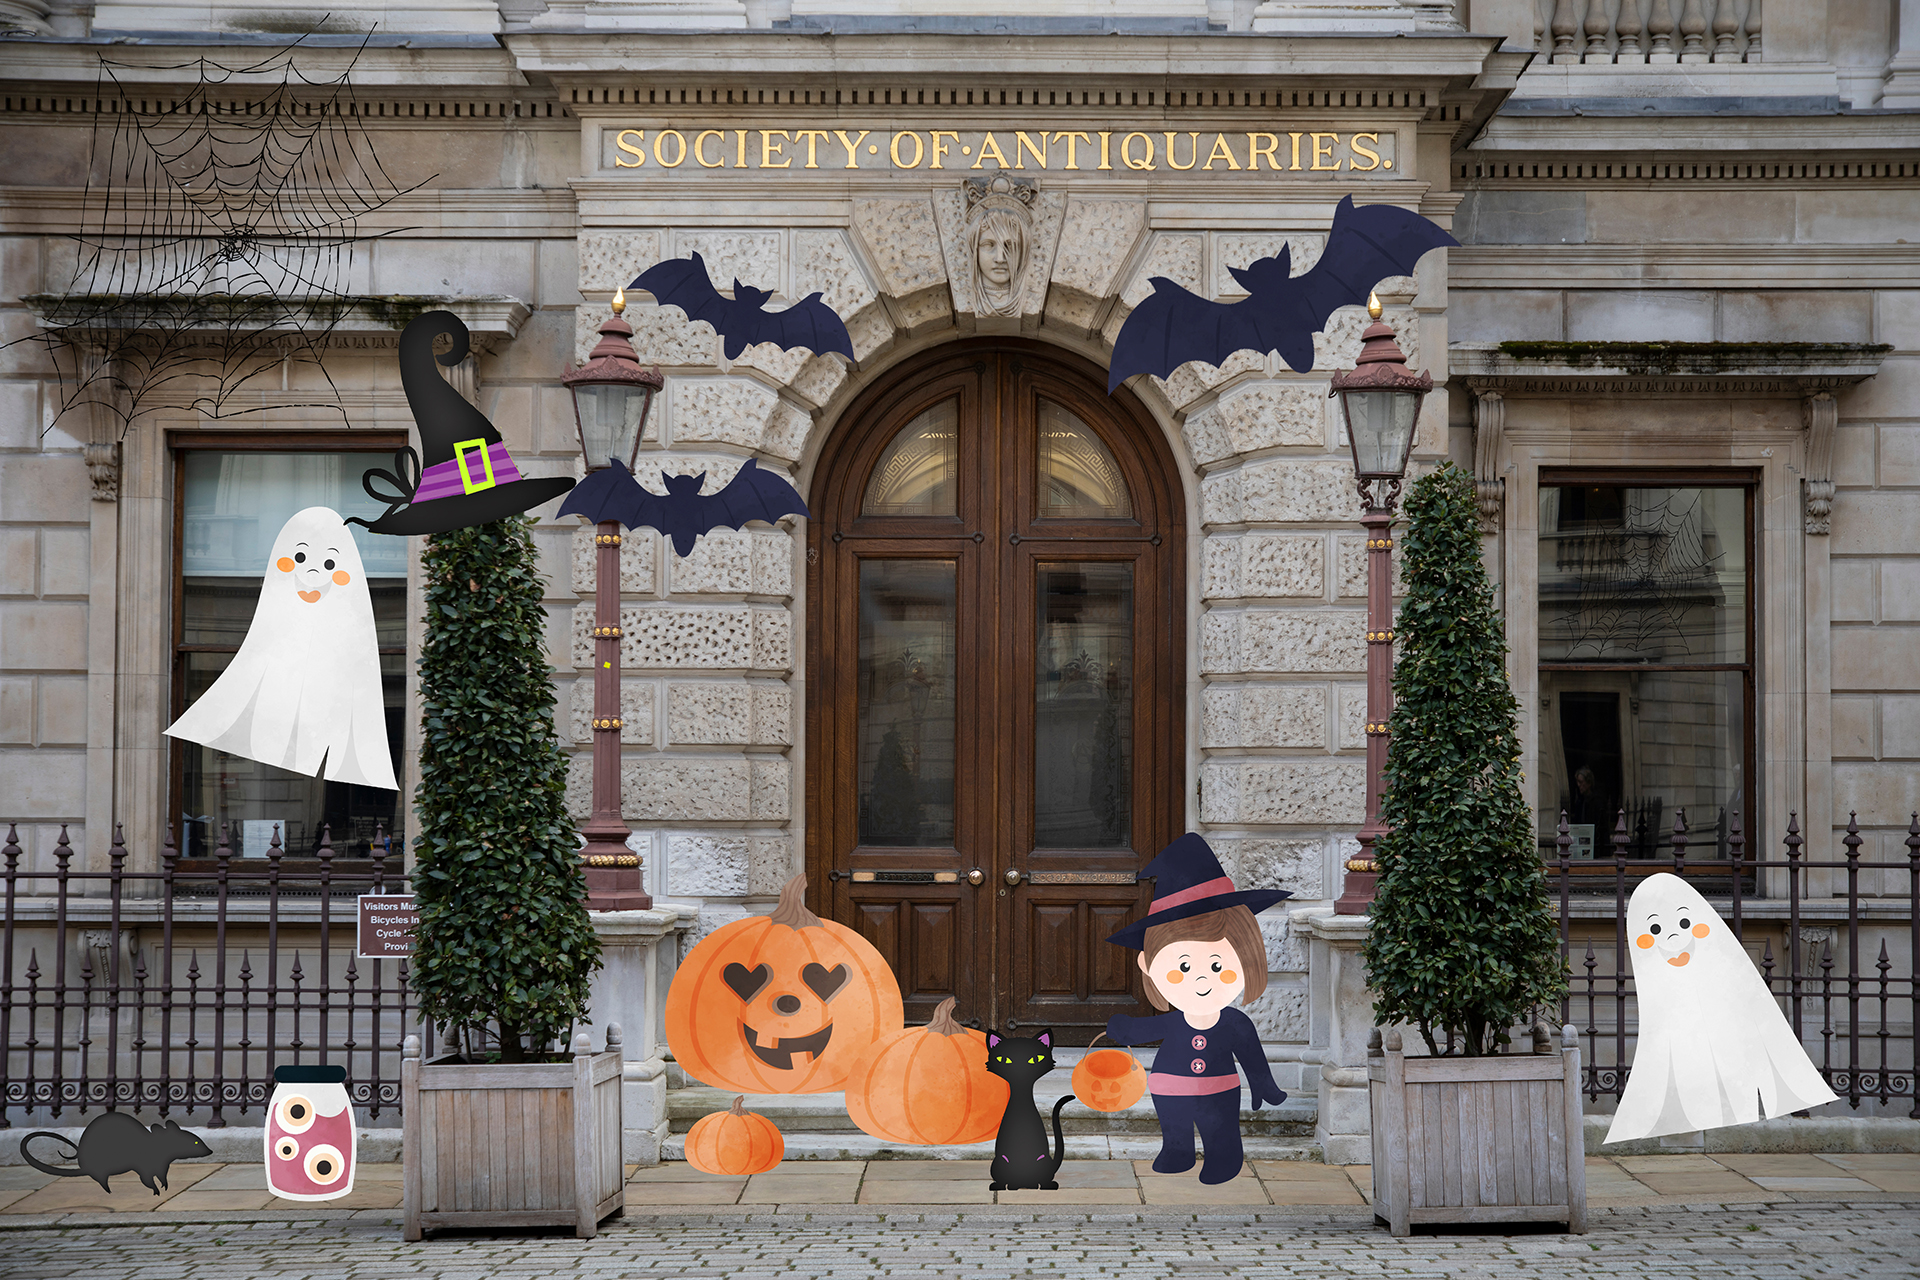 The outside of Burlington House decorated with cartoon Halloween imagery.